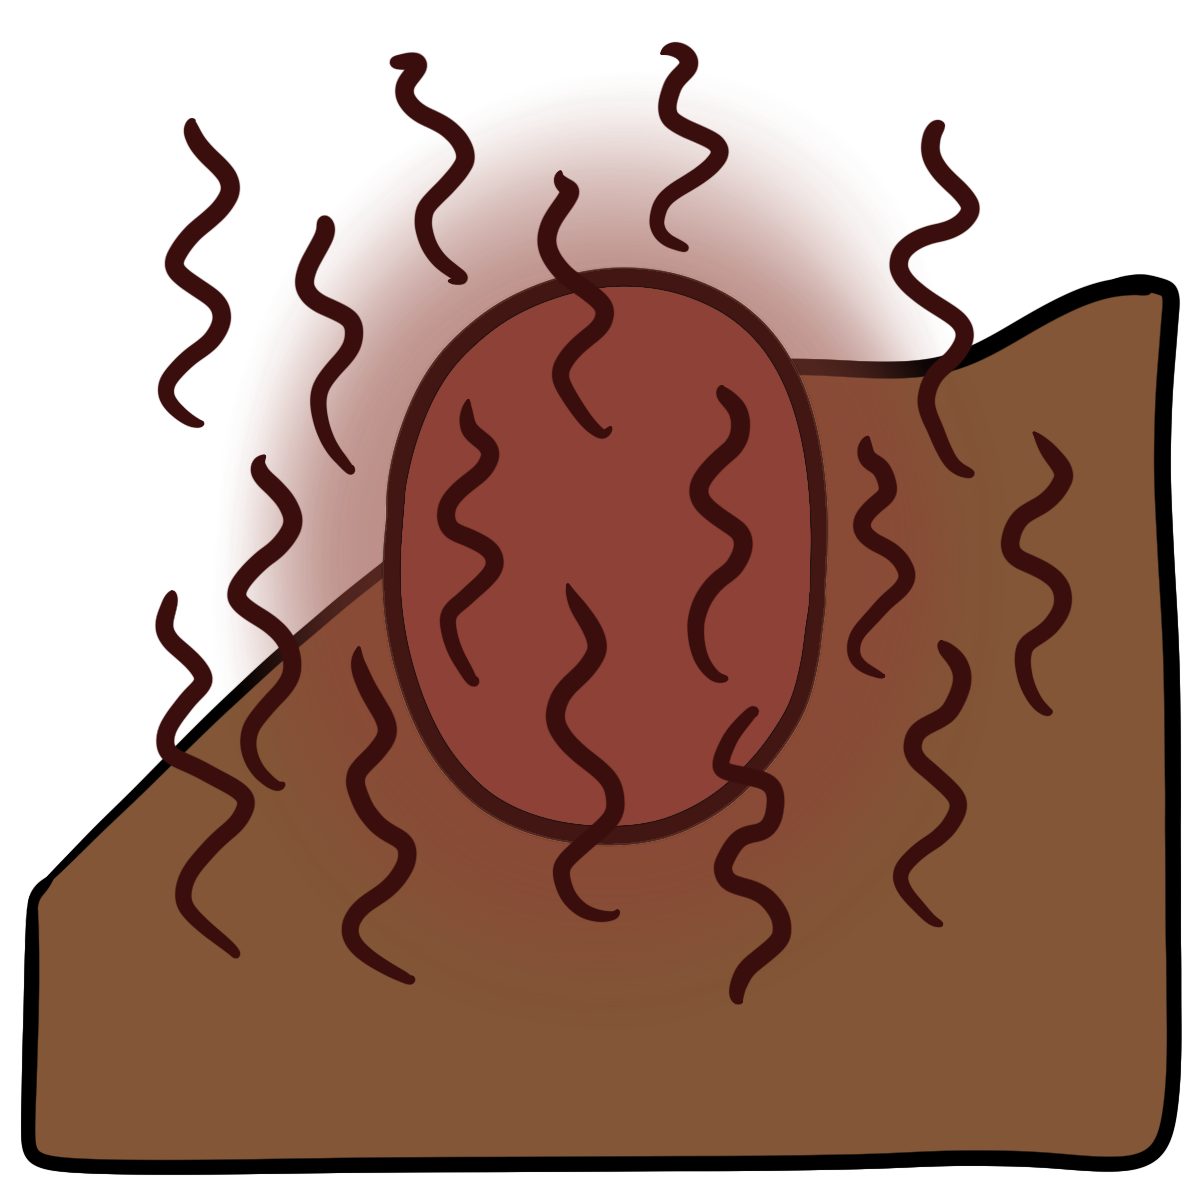 A red glowing oval with vertical squiggly dark red lines around it. Curved medium brown skin fills the bottom half of the background.